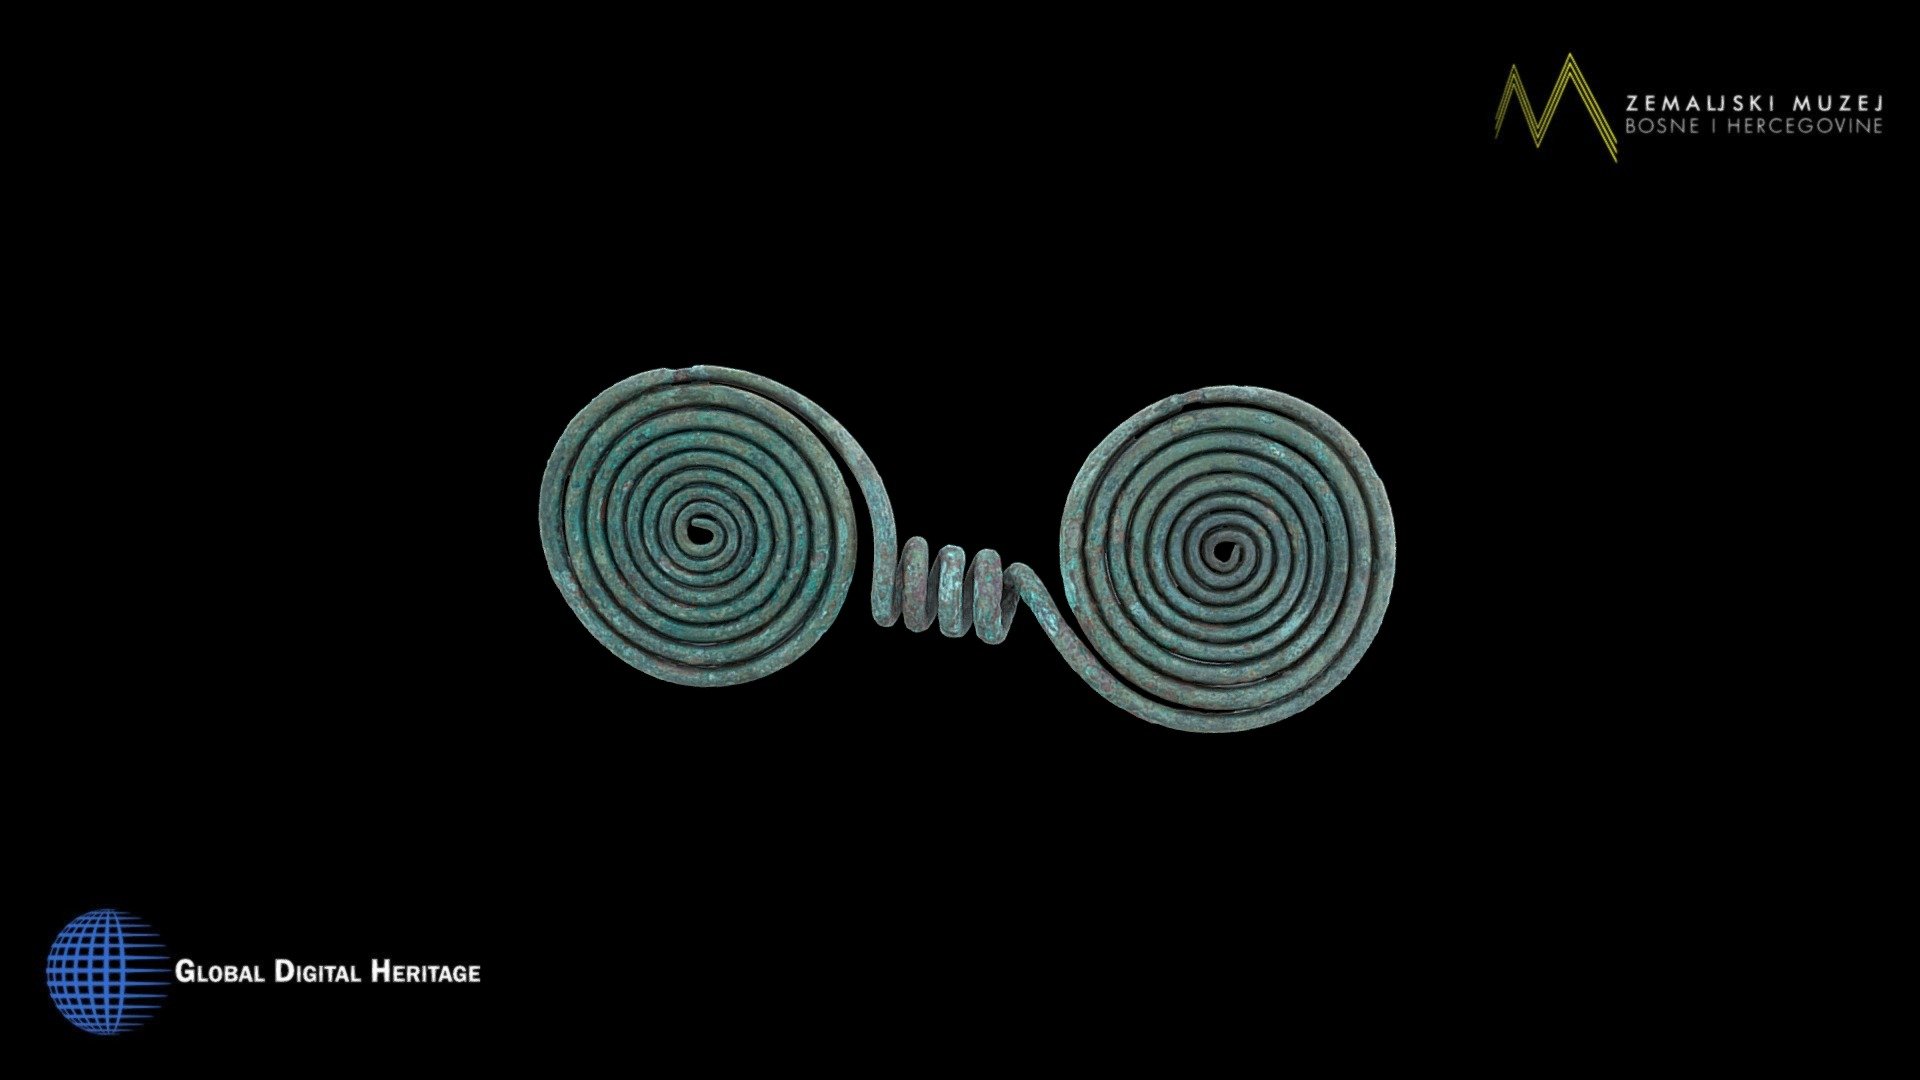 &ldquo;Early and Middle Bronze Age of eastern Bosnia Bronze spectacle pendant, made of two discs and spiral between them. Lenght 13.9 cm. From the site of  Laze on Glasinac (eastern Bosnia) - Tumulus XVII, Grave 1. Late 3rd and first half of the 2nd millenium BCE. Artifact in the National Museum of Bosnia and Herzegovina. Processed in Reality Capture from 555 images. GDH ID No. 1329 

This project is a collaboration between Global Digital Heritage and the National Museum of Bosnia and Herzegovina in Sarajevo.